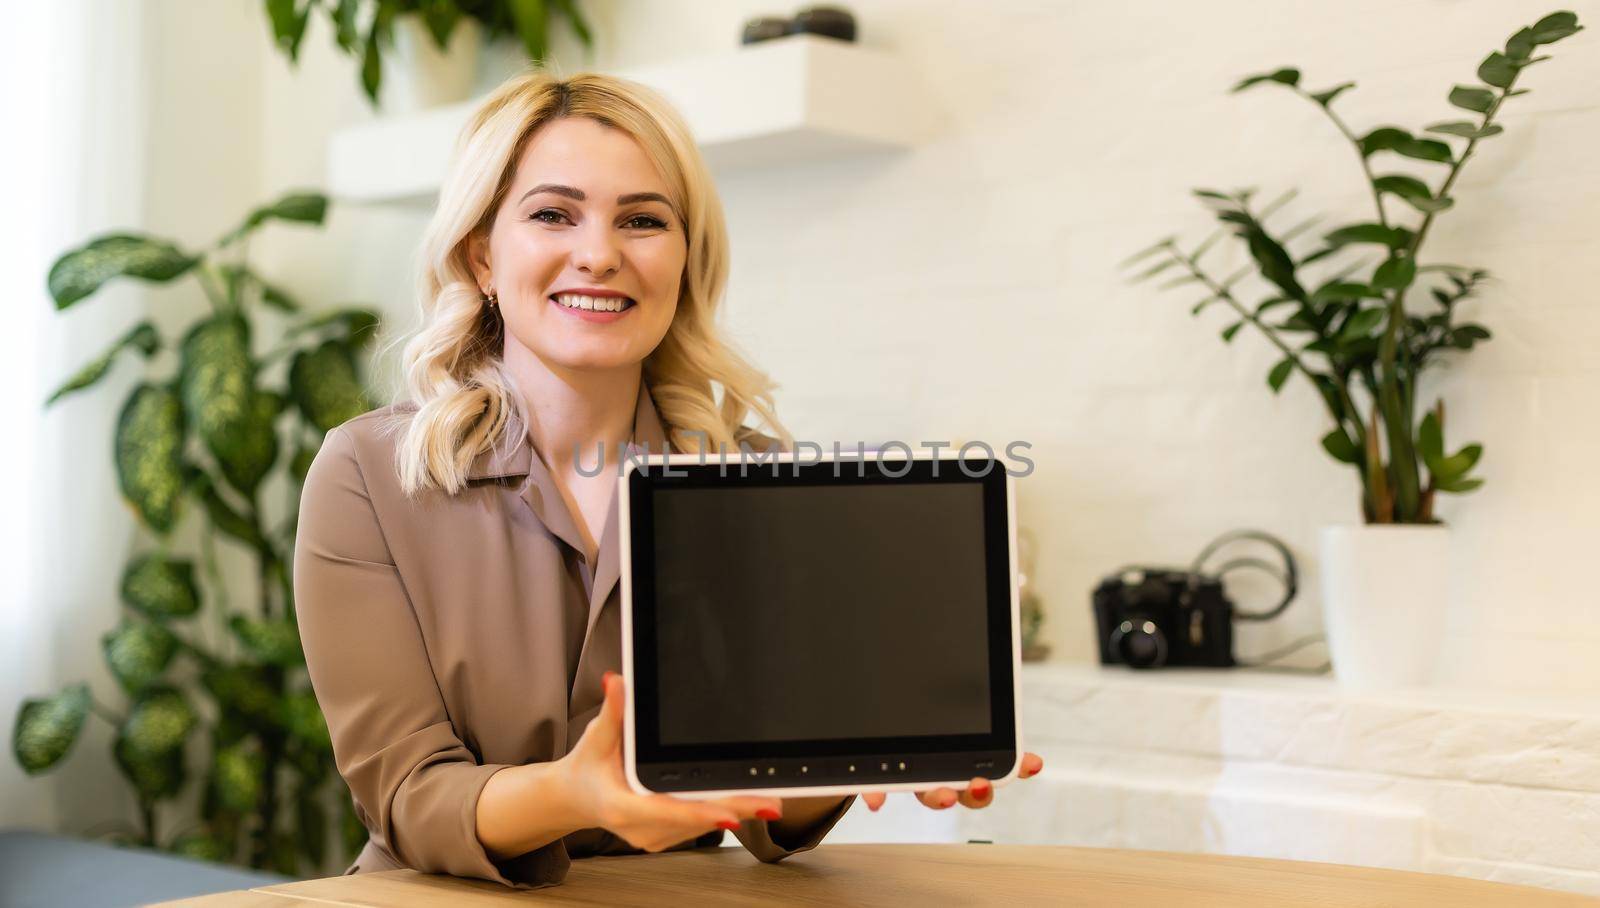 Young smiling woman showing blank tablet computer screen in office. Focus on tablet computer by Andelov13